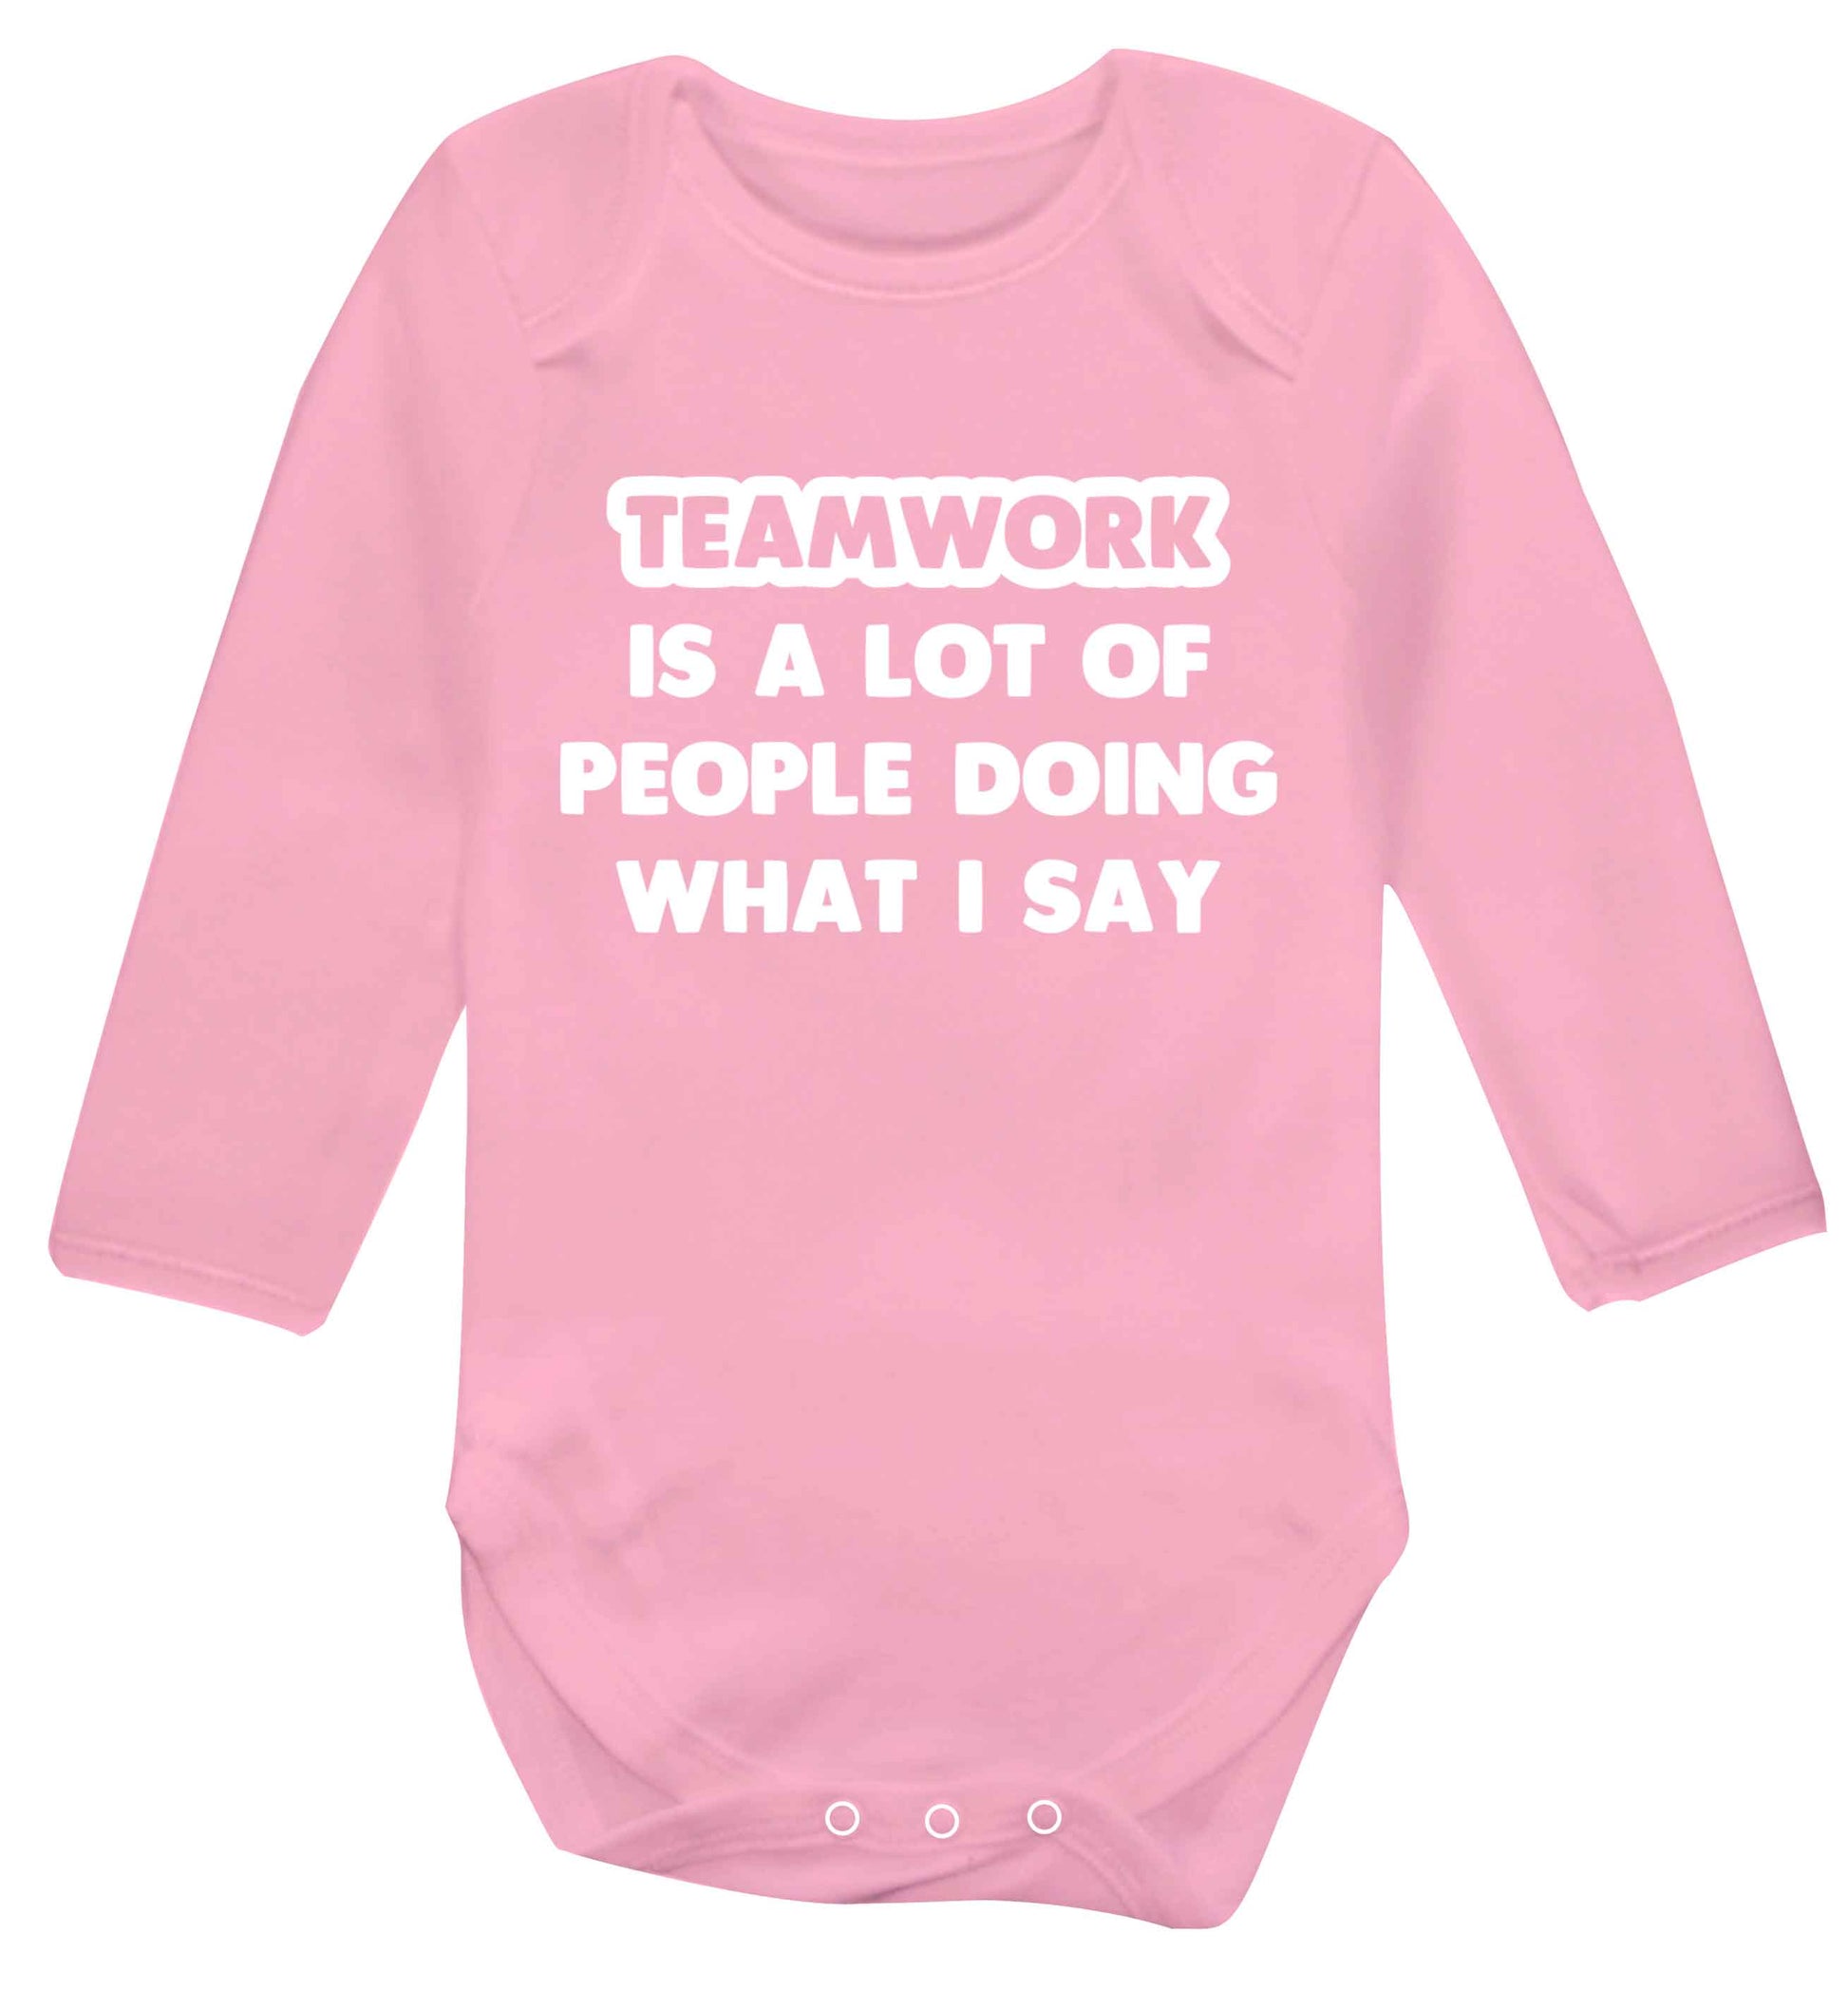 Teamwork is a lot of people doing what I say Baby Vest long sleeved pale pink 6-12 months